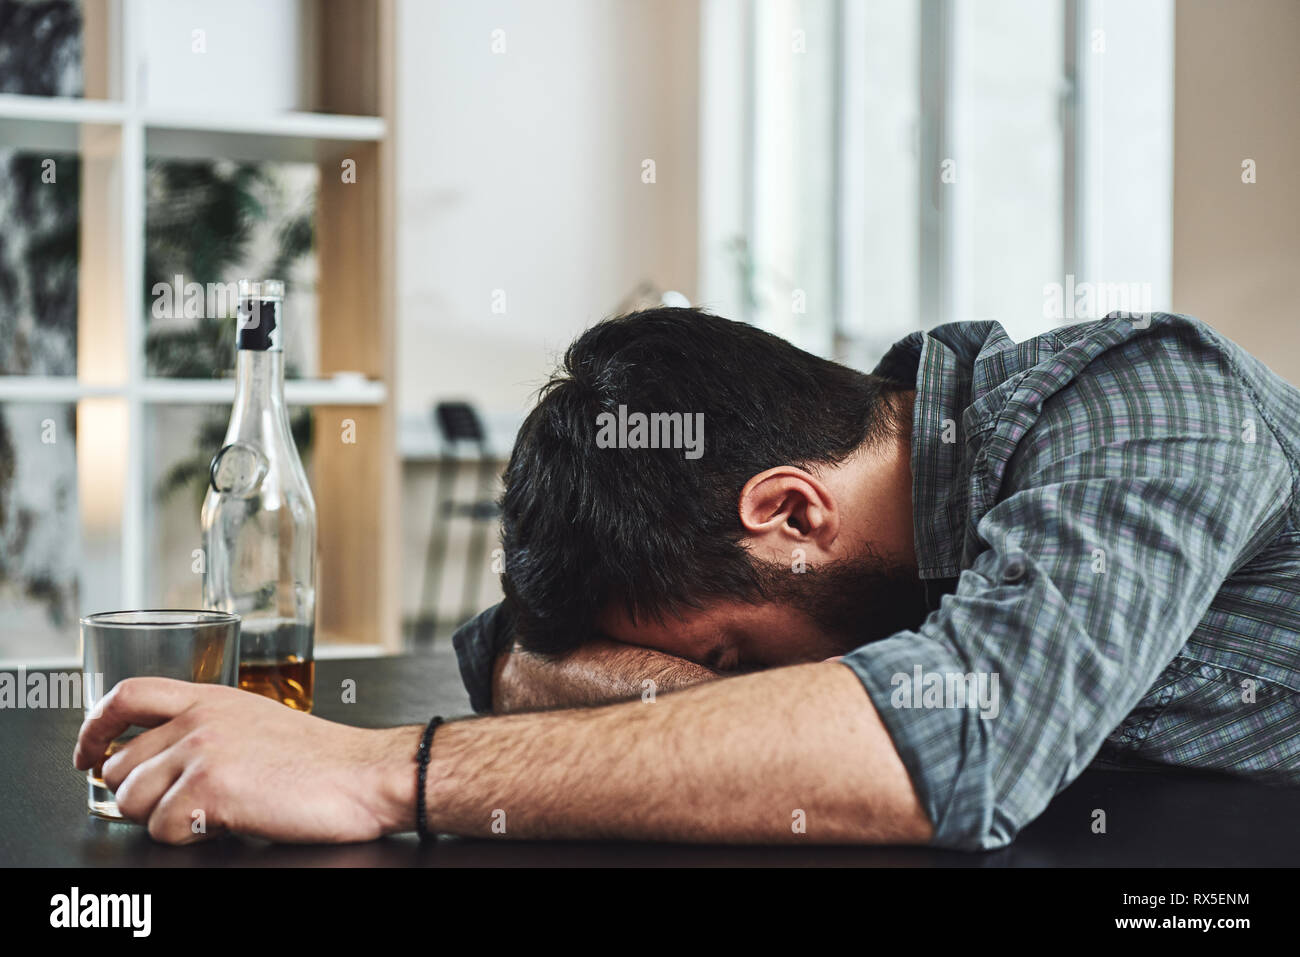 Dark-haired, sad and wasted alcoholic man lying on a table, in the kitchen, drinking whiskey, holding glass, completely drunk, looking depressed, lone Stock Photo